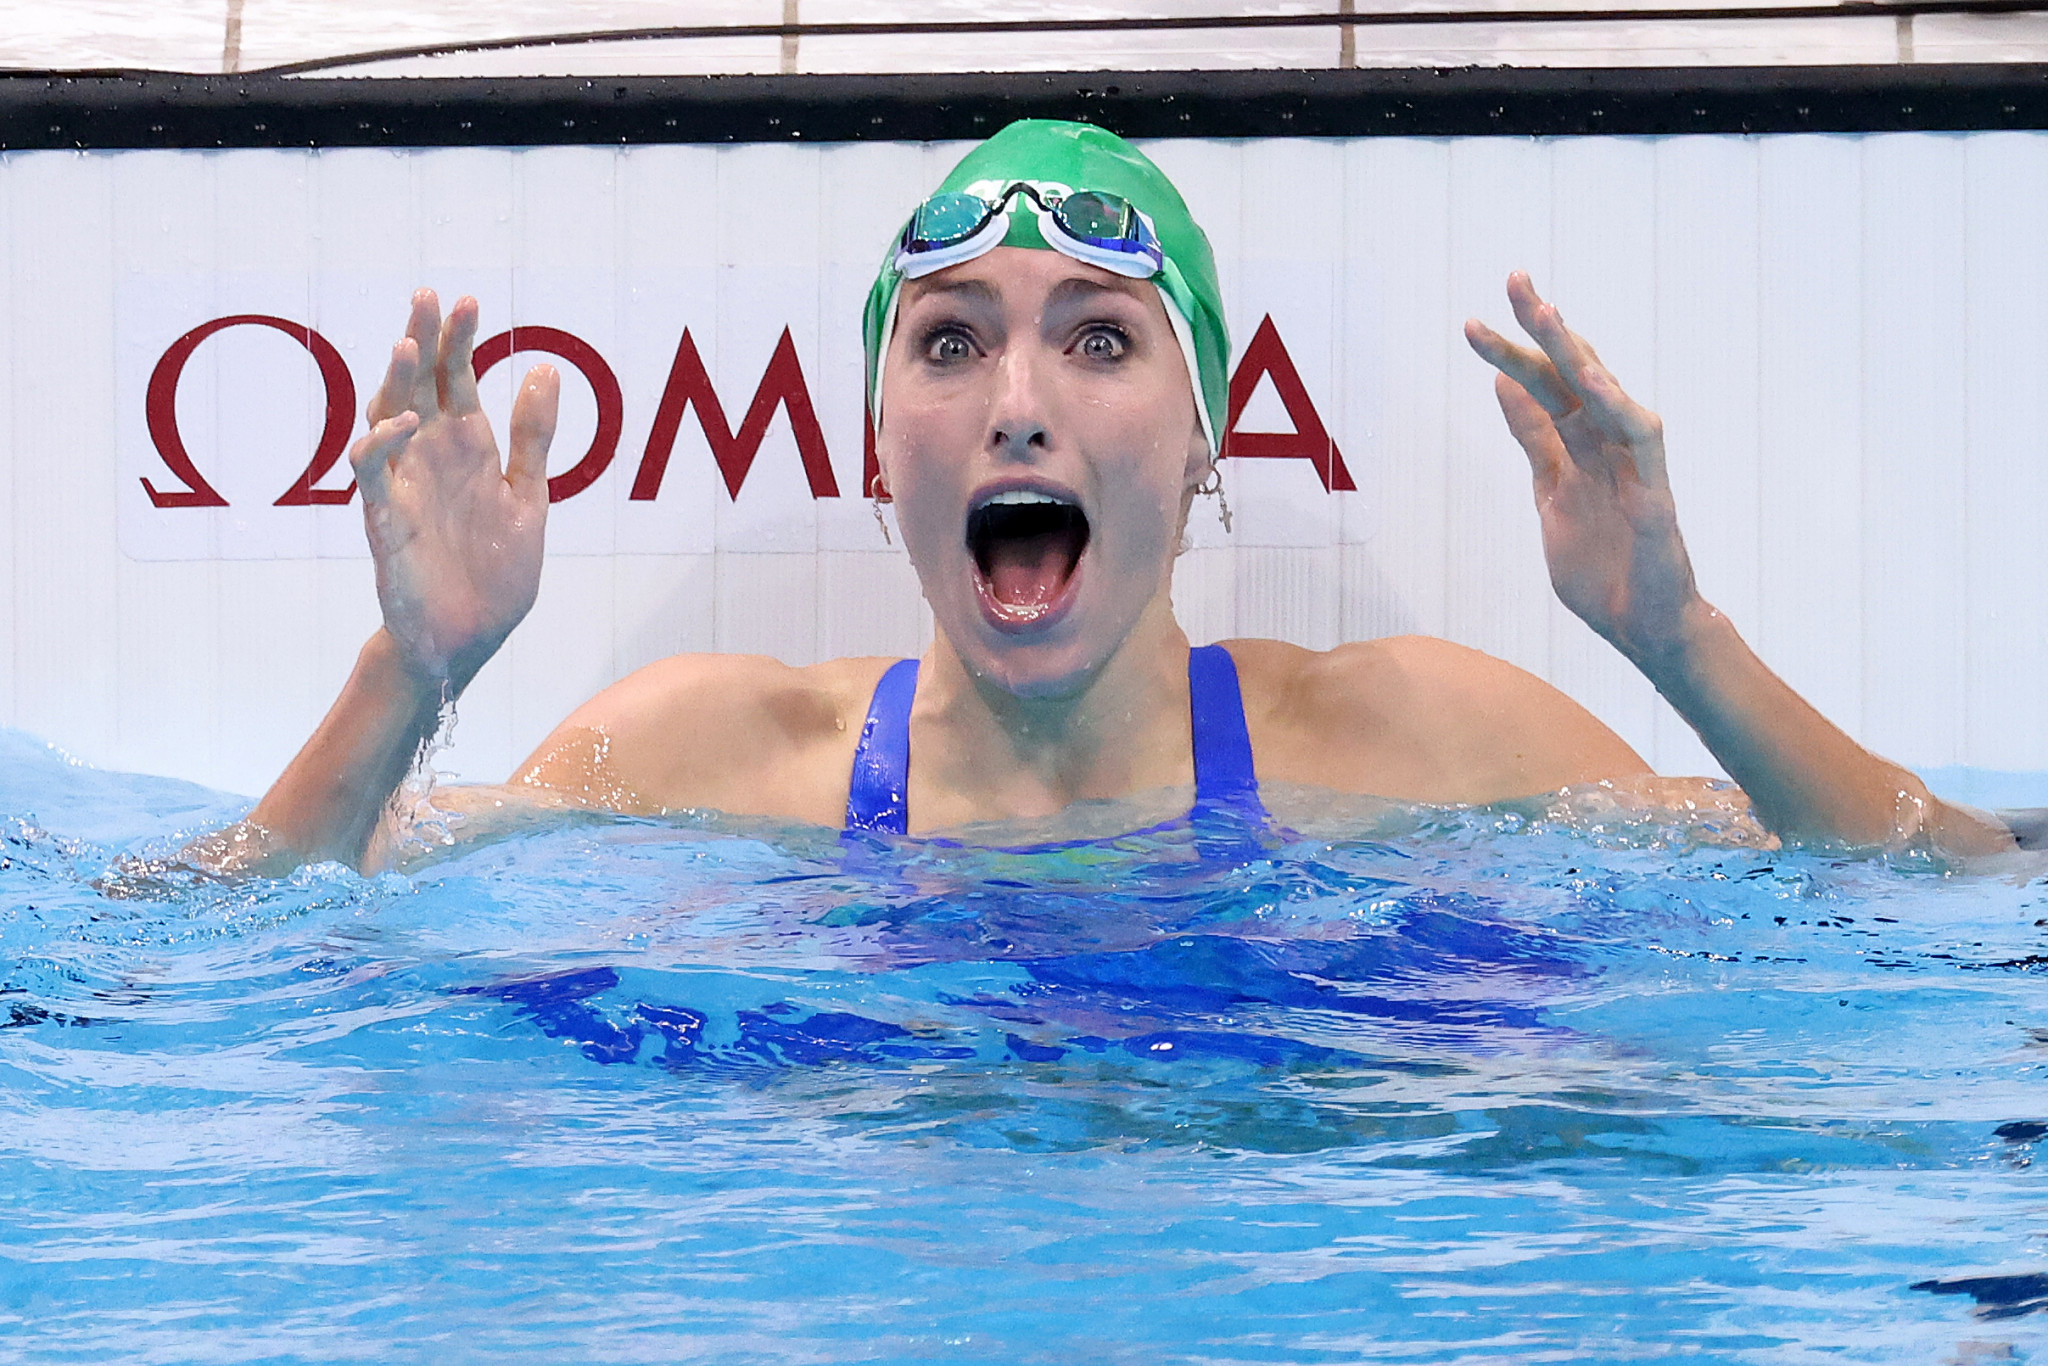 South Africa’s Tatjana Schoenmaker won the 200 metres breaststroke at the Tokyo 2020 Olympics in a world record time of 2:18.95 ©Getty Images